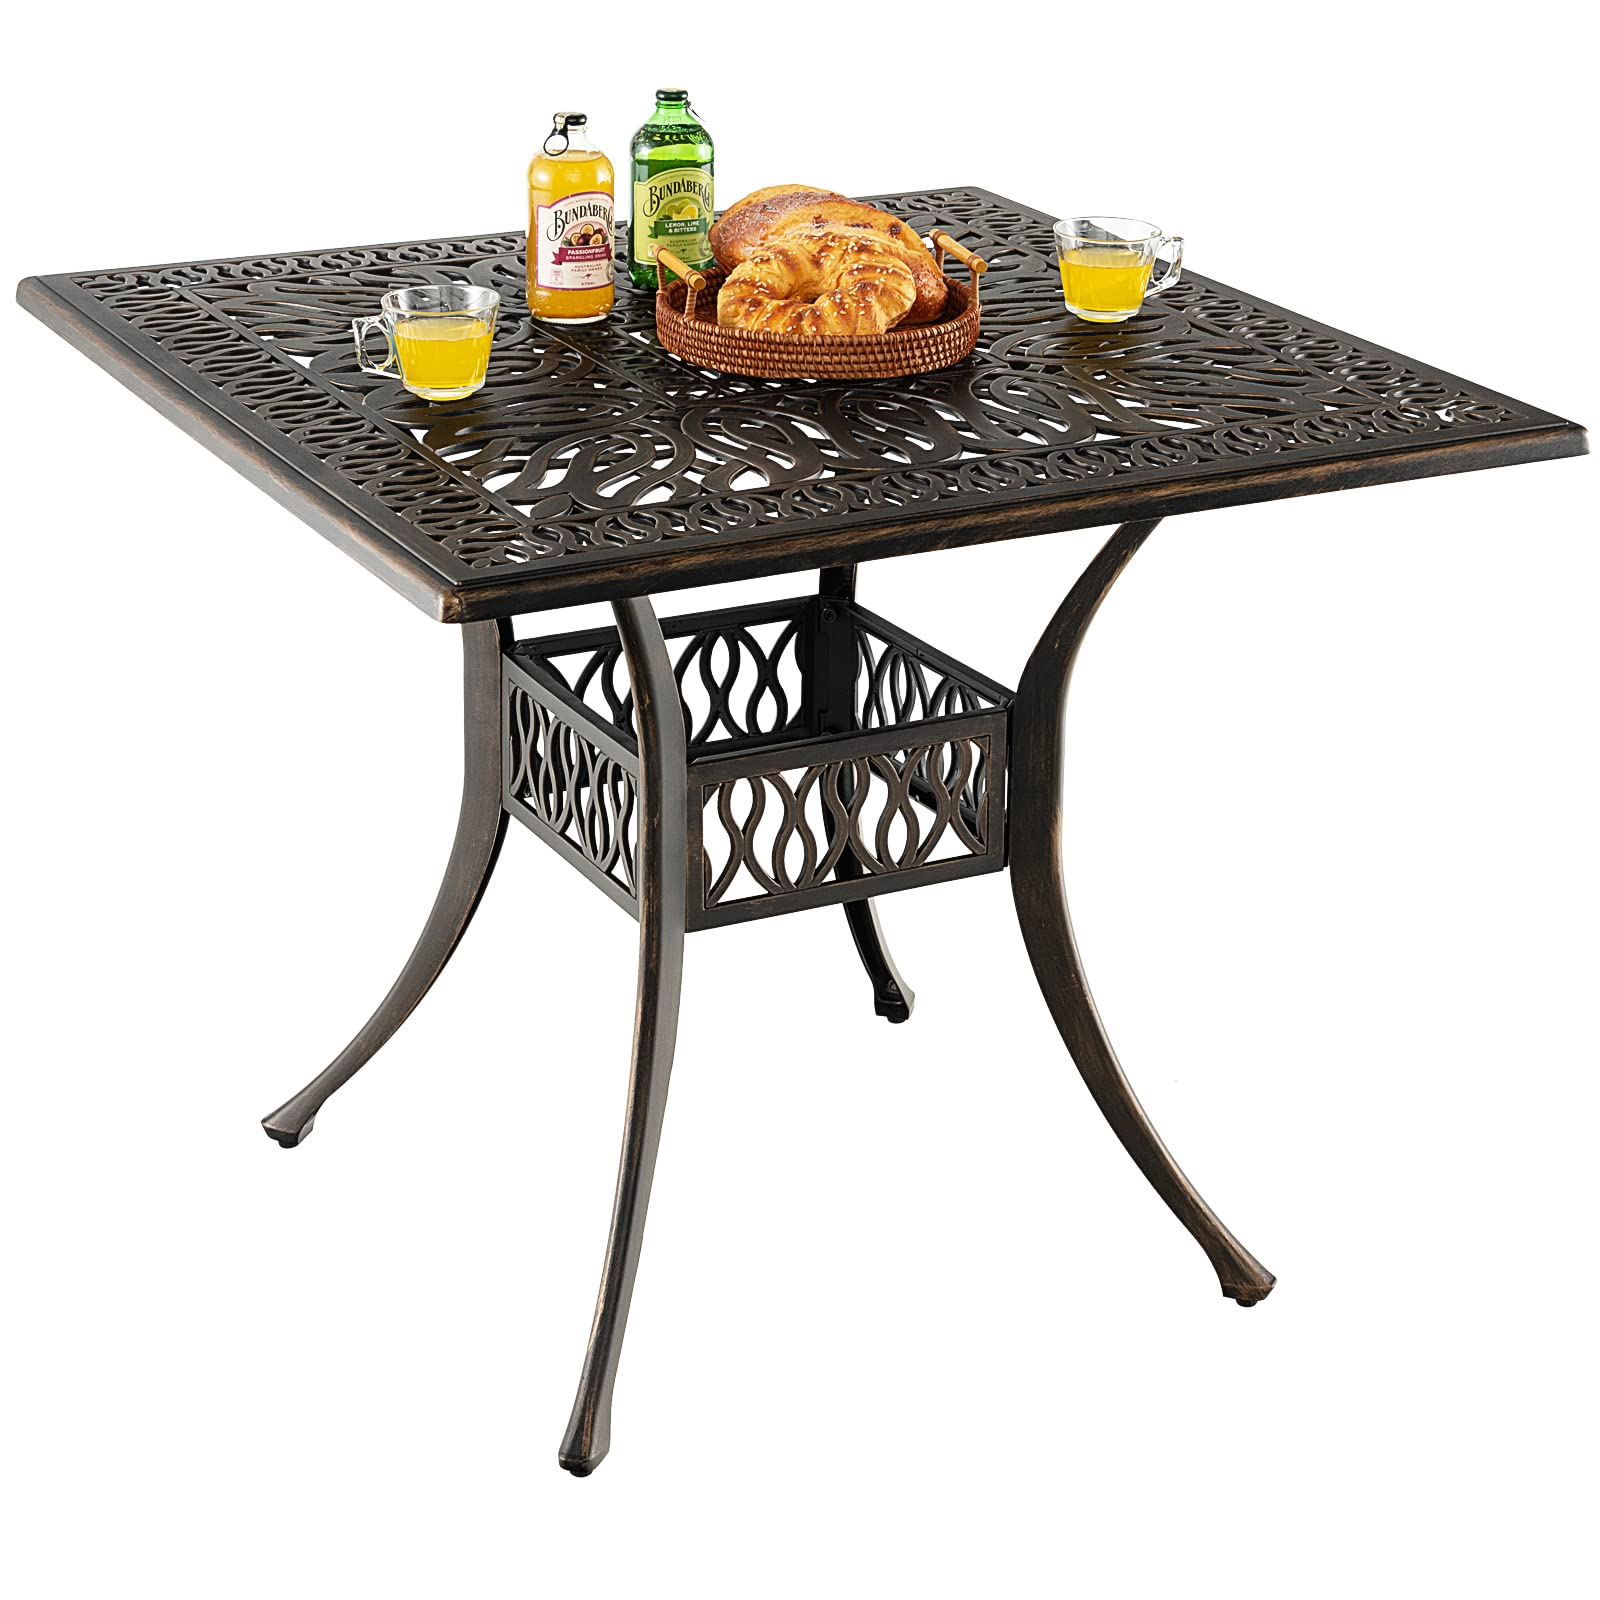 Giantex Patio Dining Table, Cast Aluminum Outdoor Table for 4 Persons